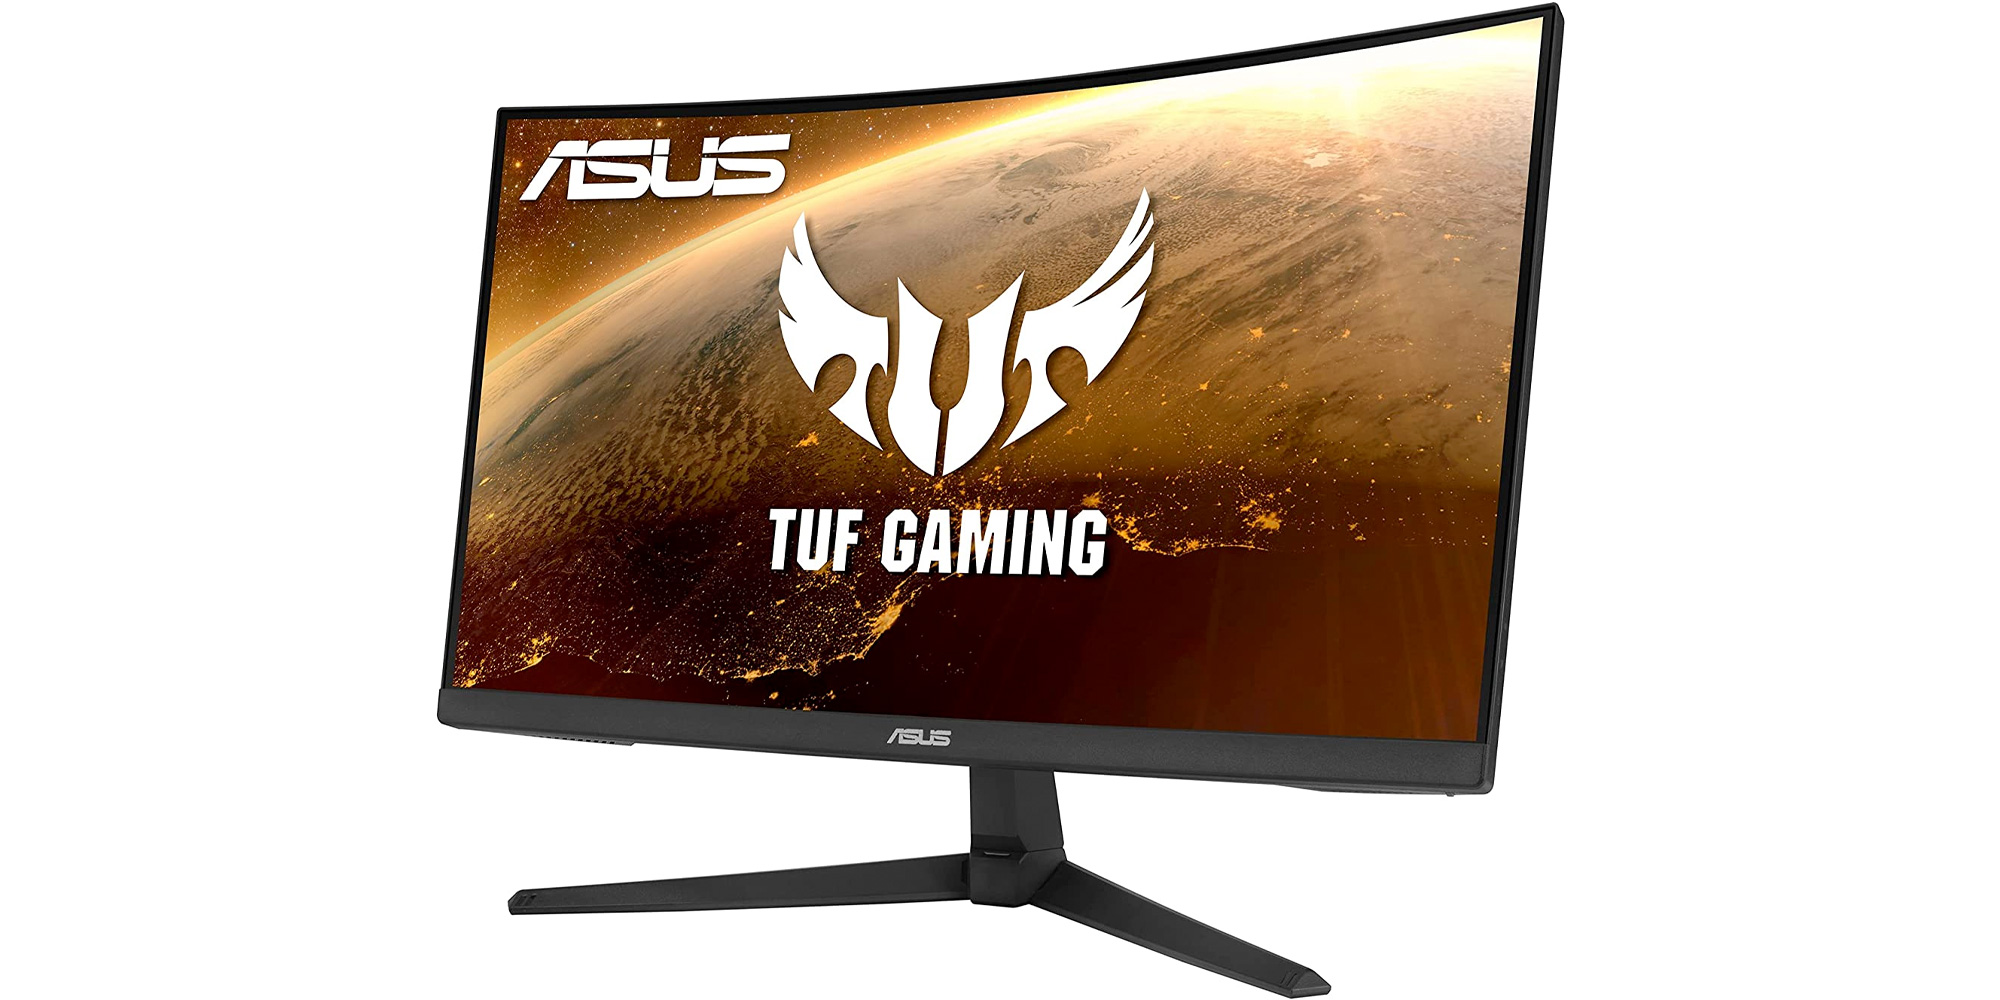 Finally join the high refresh rate ranks with ASUS' TUF 24-inch 1080p ...